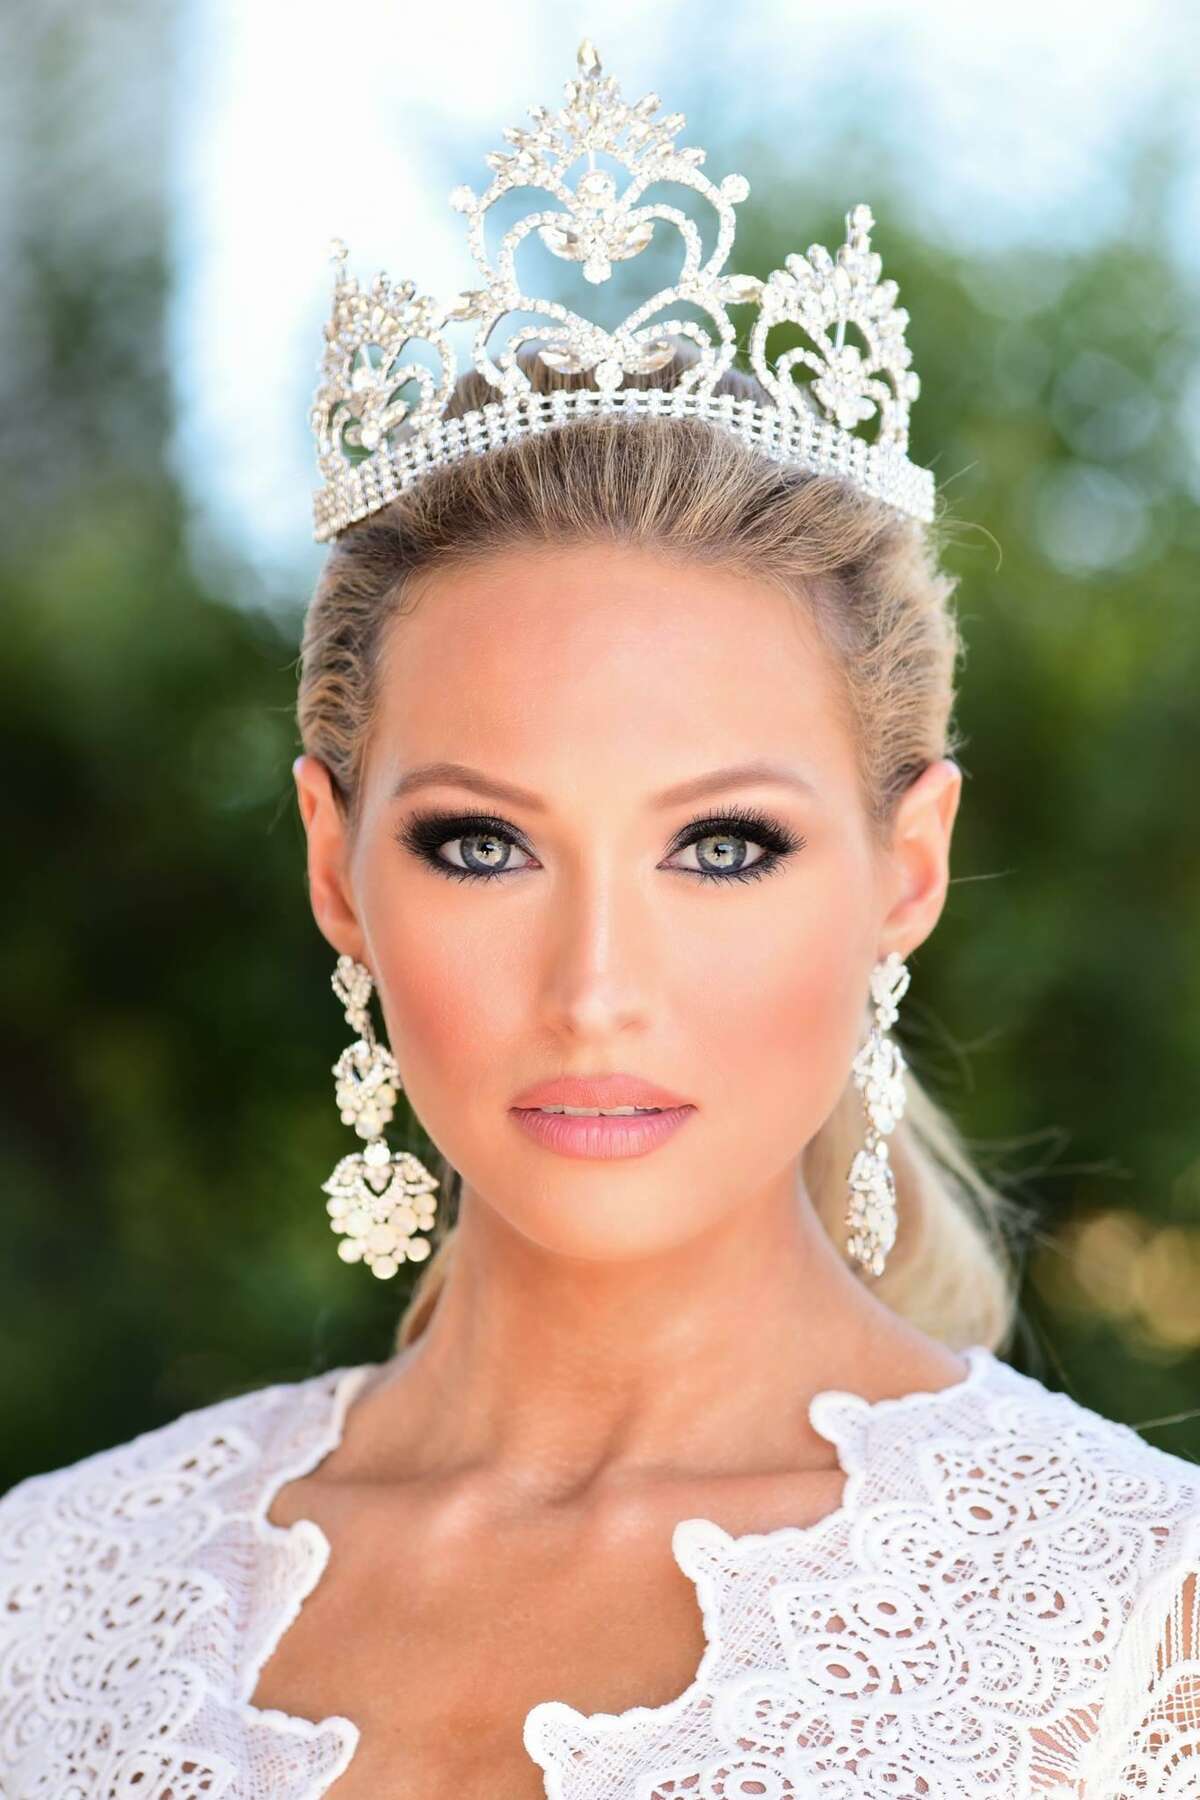 Woman survives rare stomach cancer, crowned Mrs. Texas